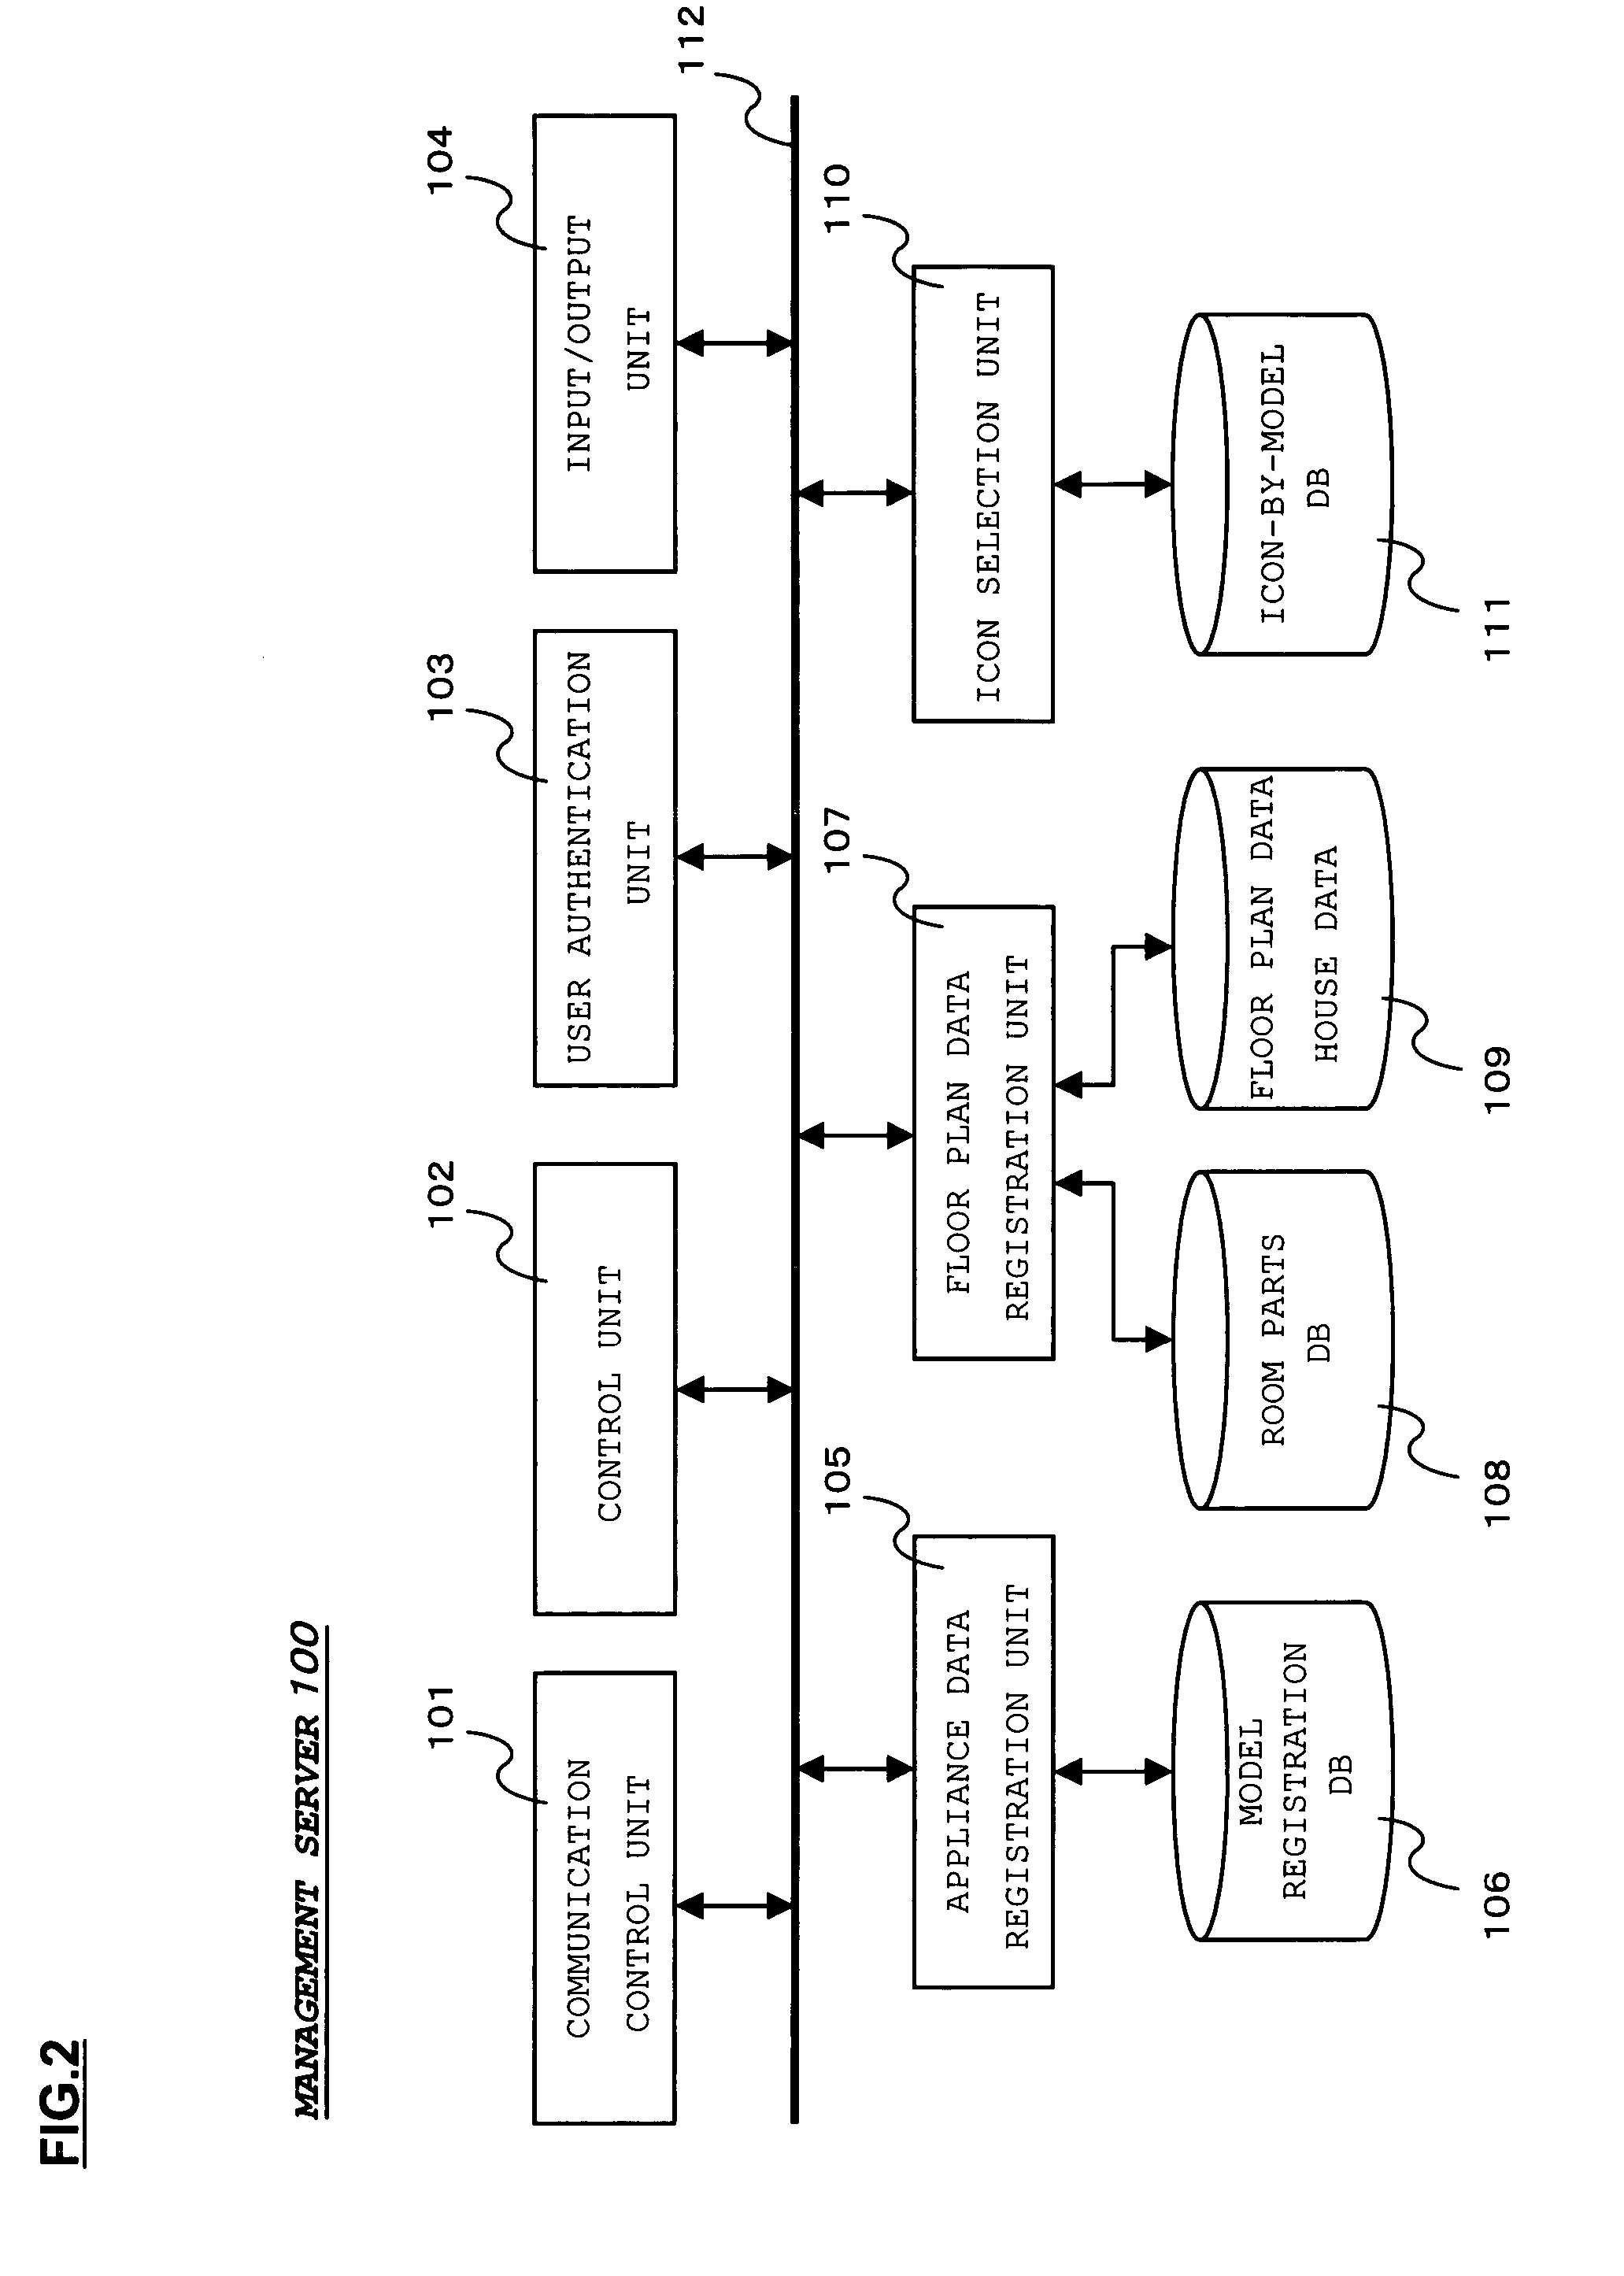 Network apparatus and program product